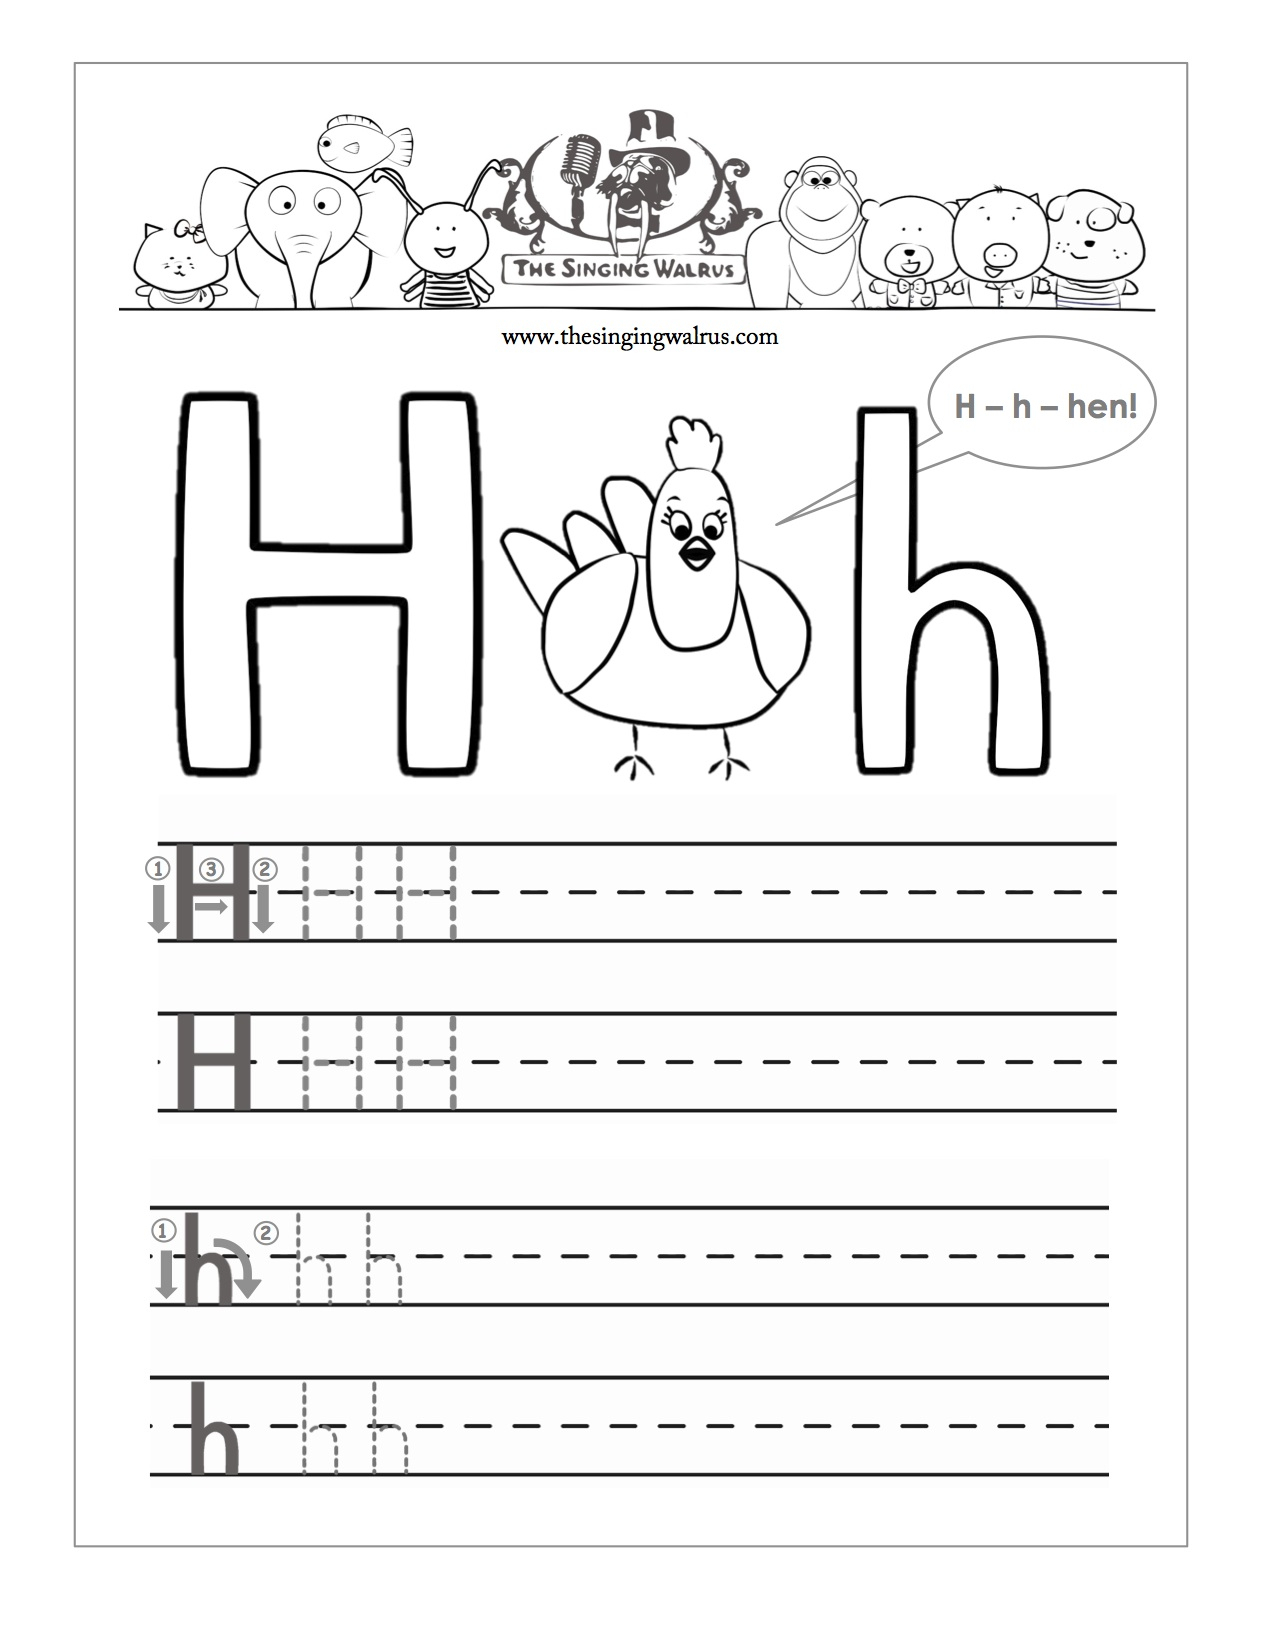 14 Enjoyable Letter H Worksheets For Kids | Kittybabylove within Letter H Worksheets Free